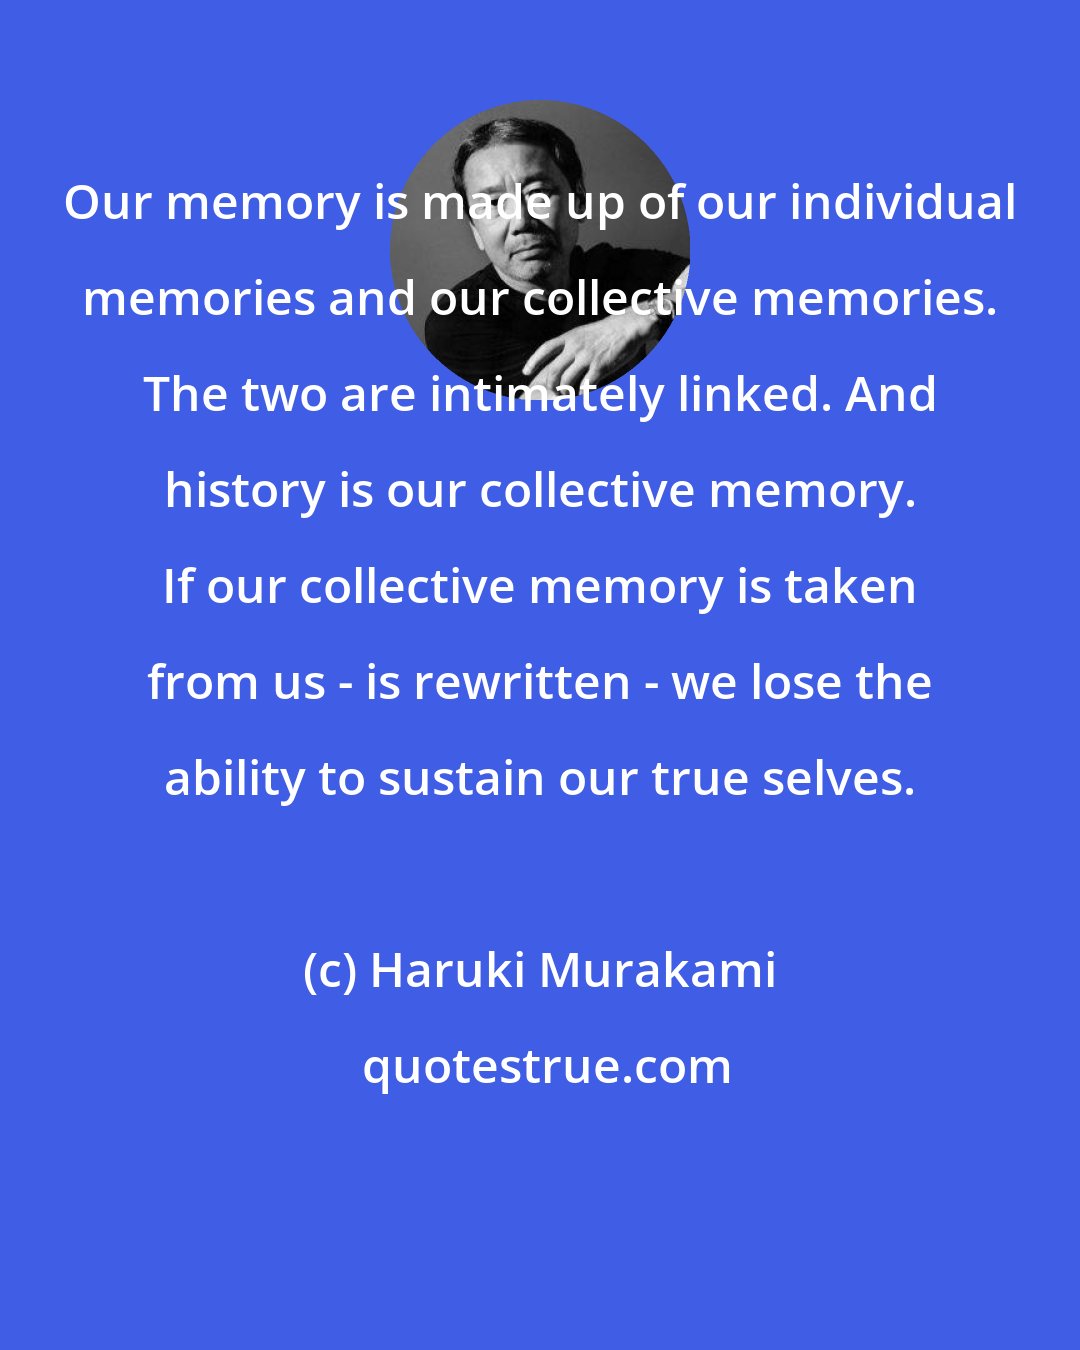 Haruki Murakami: Our memory is made up of our individual memories and our collective memories. The two are intimately linked. And history is our collective memory. If our collective memory is taken from us - is rewritten - we lose the ability to sustain our true selves.